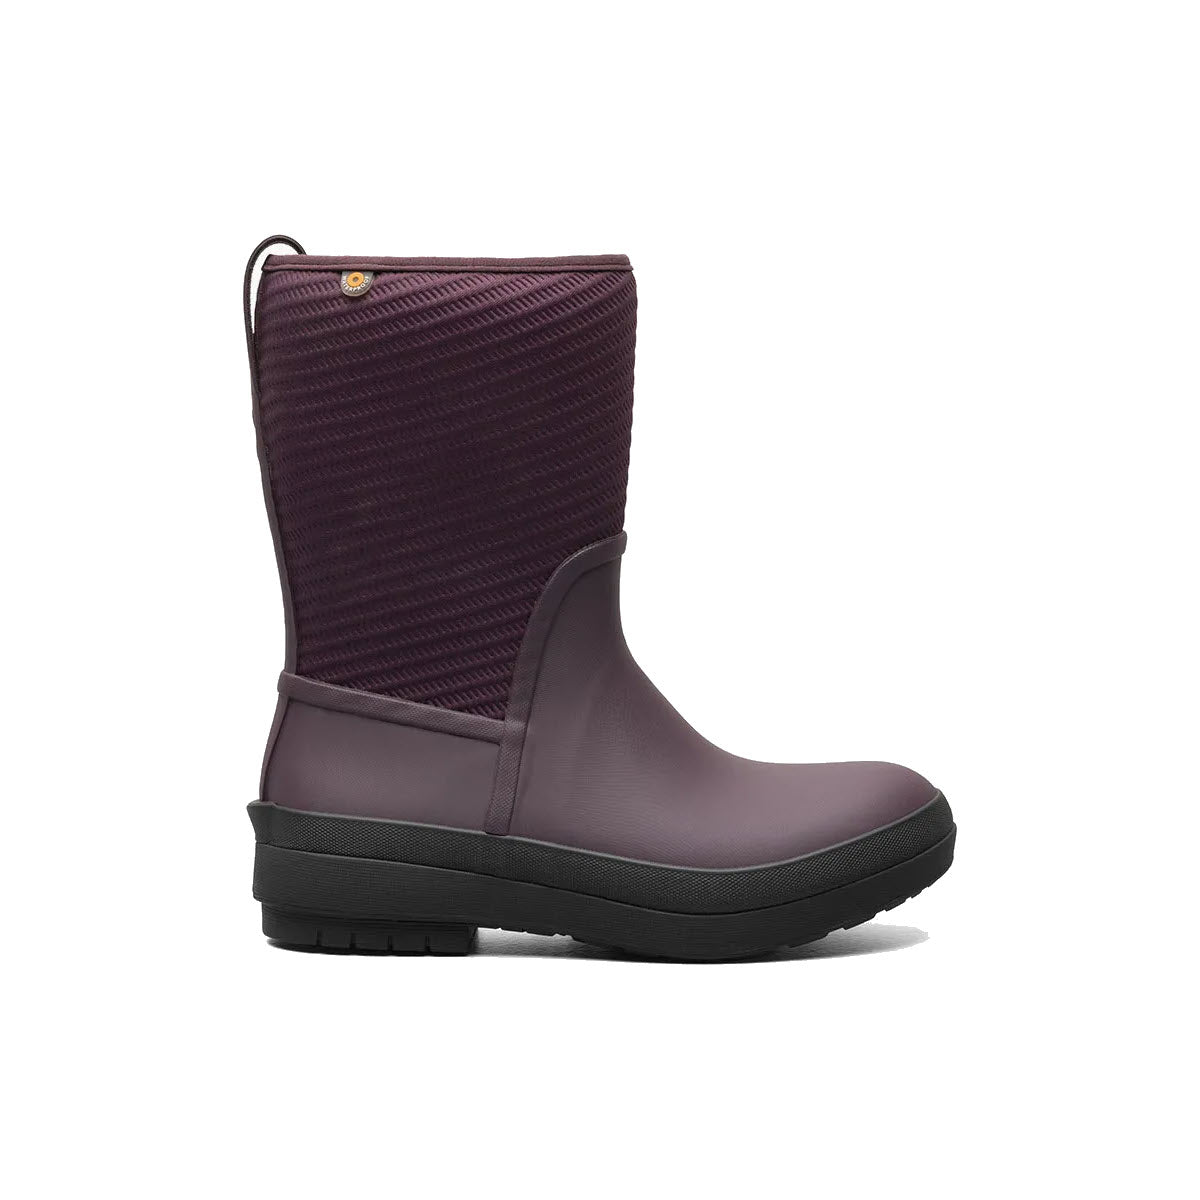 A single Bogs Crandall II Mid Zip Wine women's snow boot with a quilted upper section and a smooth lower section, displayed on a white background.